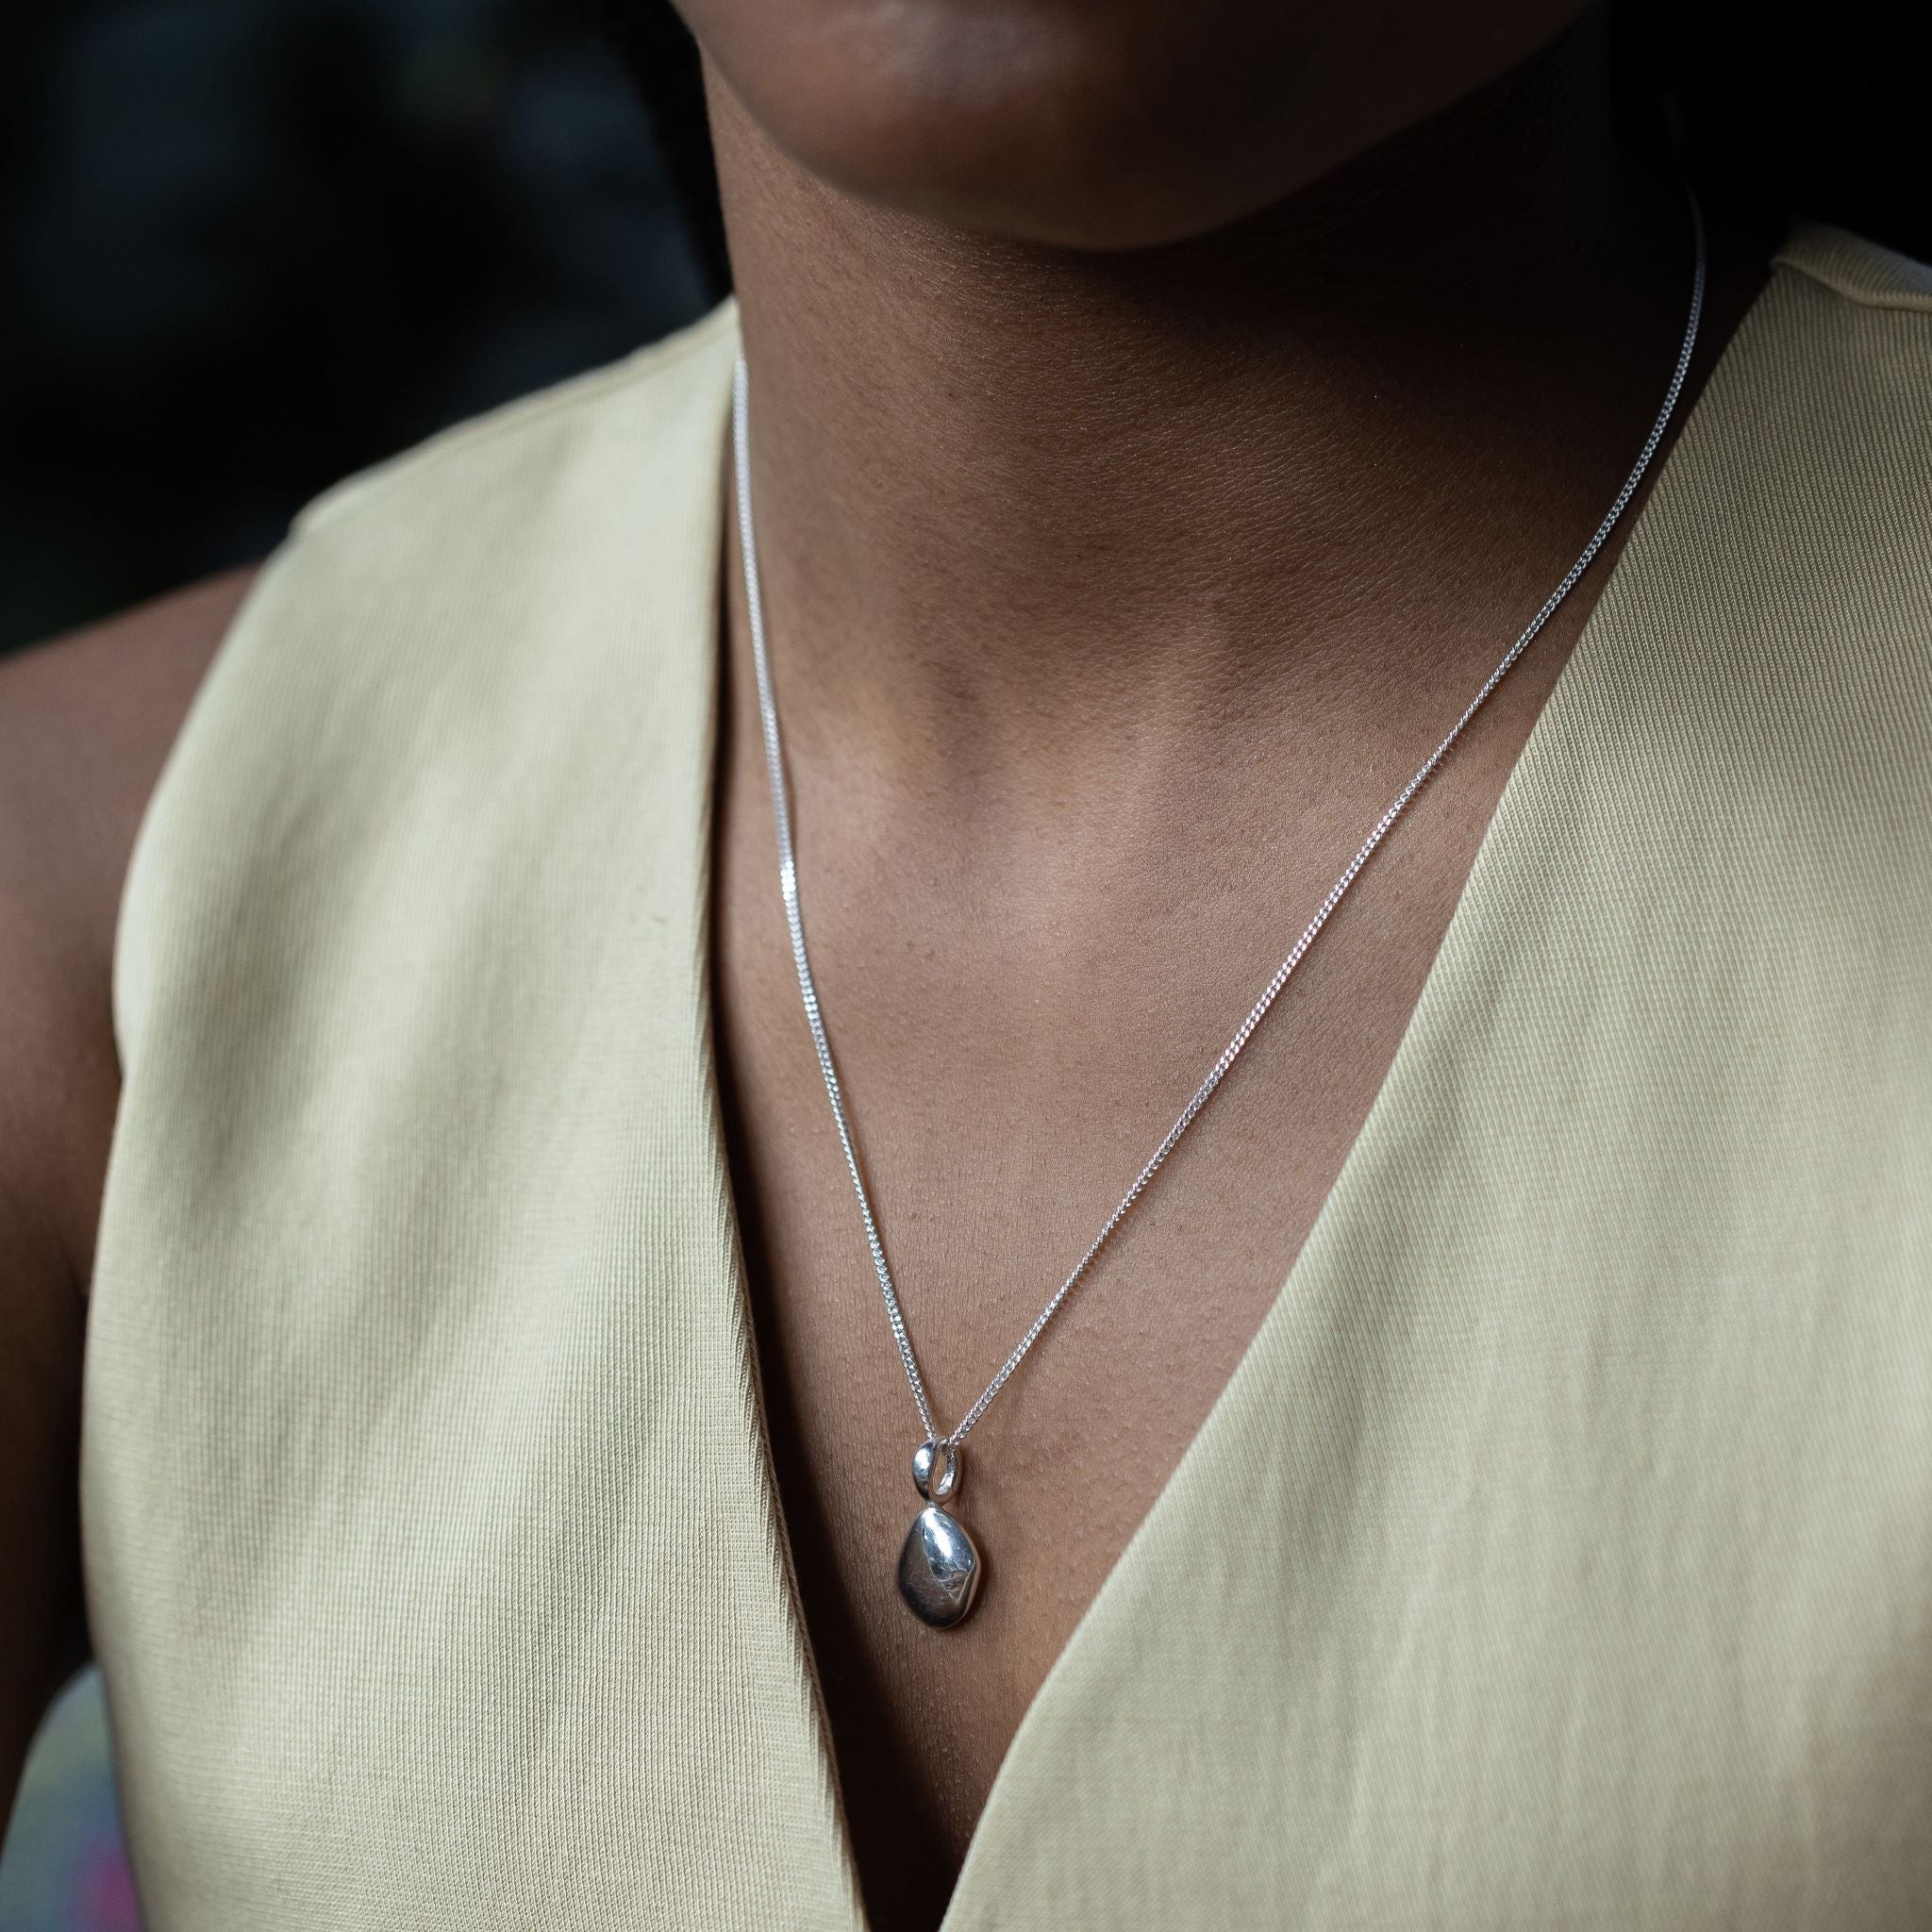 Charm features a handcut natural pebble shape and is crafted from sterling silver or 18ct gold vermeil.